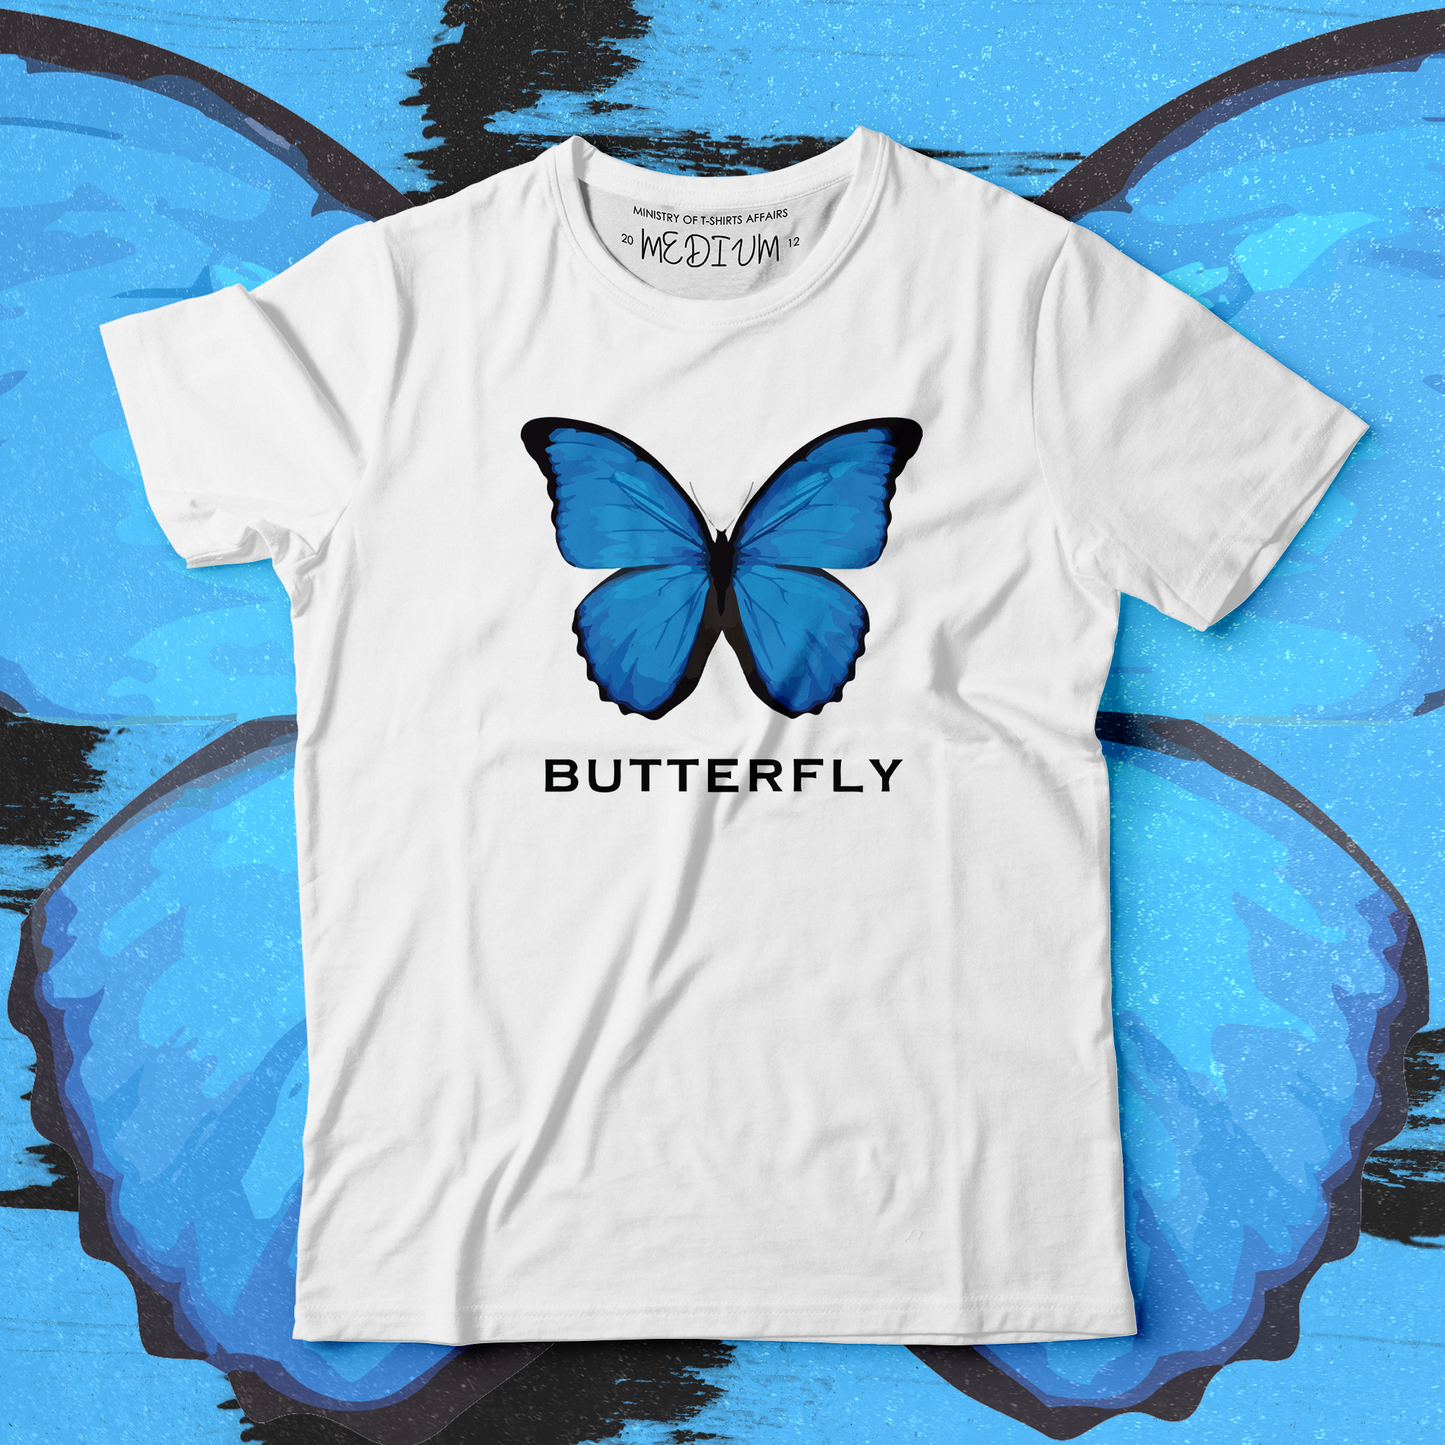 Butterfly - White